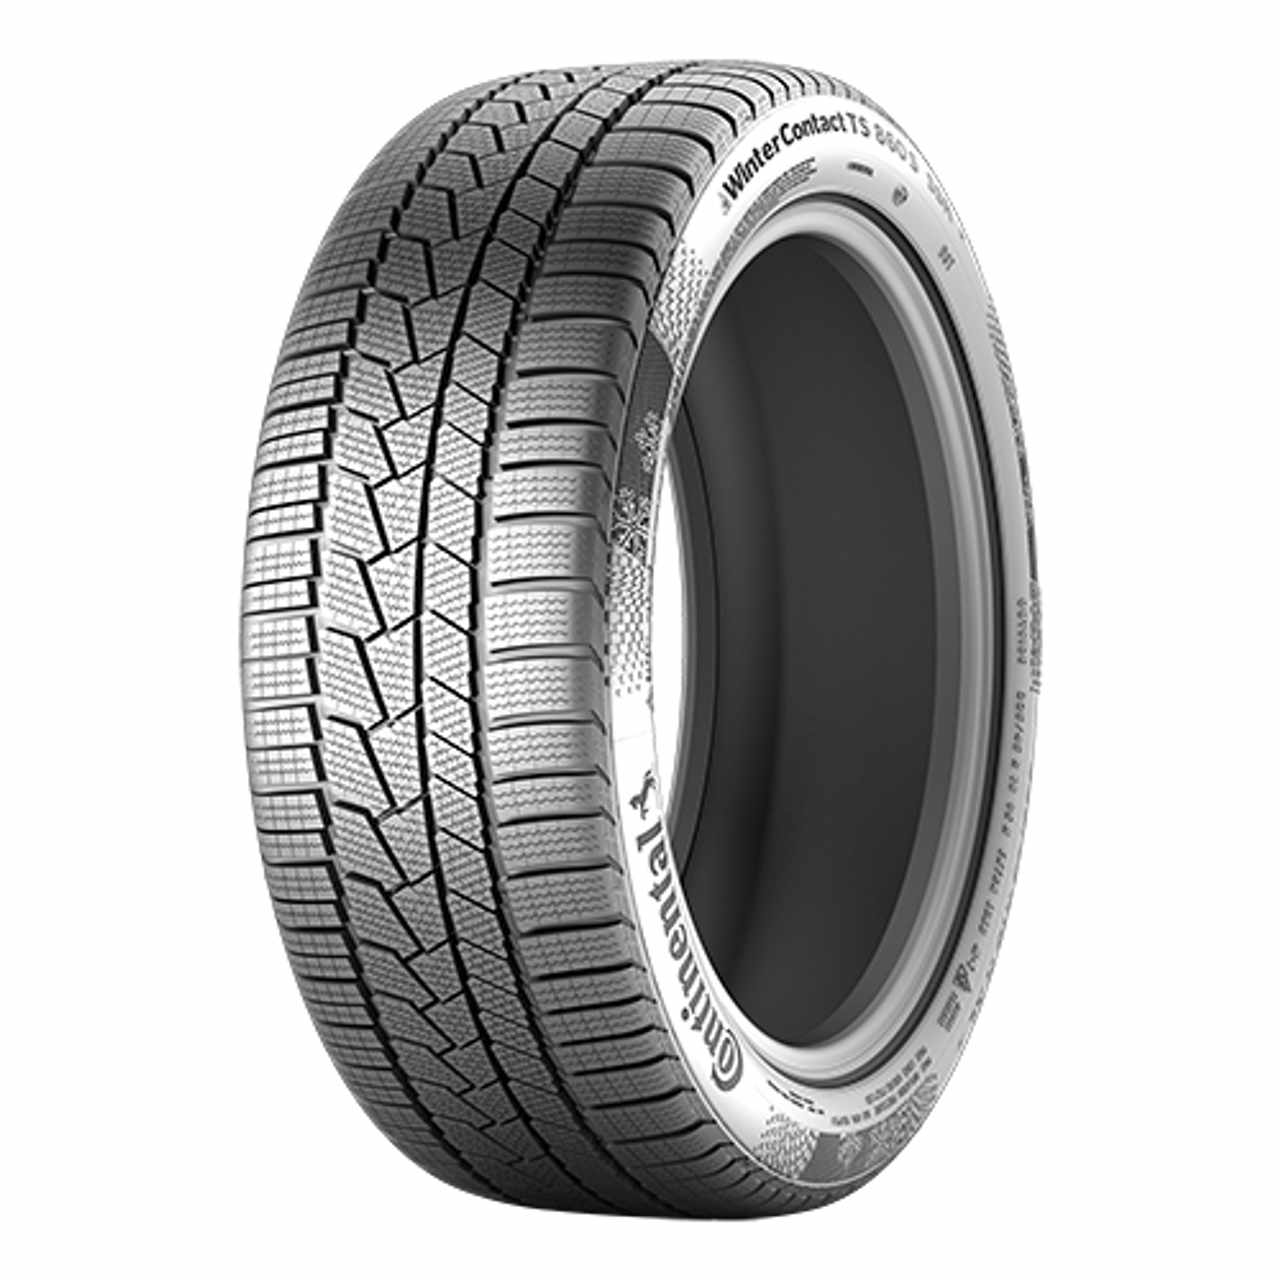 CONTINENTAL WINTERCONTACT TS 860 S (AO) 235/45R18 94V FR BSW von Continental